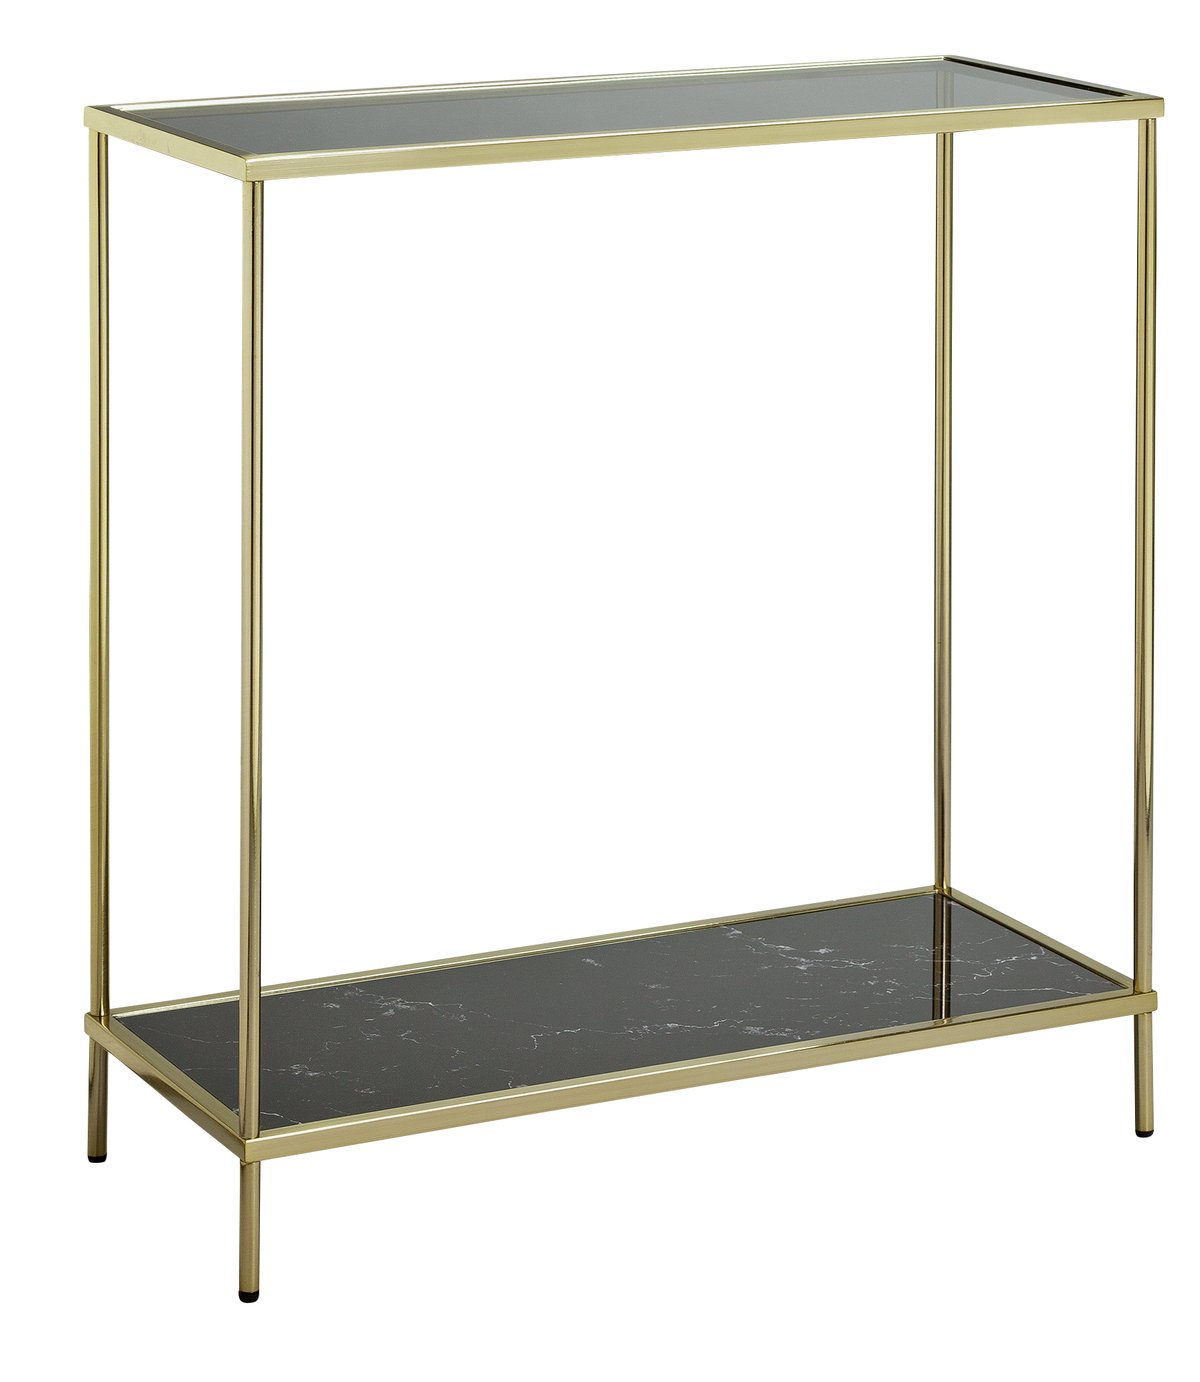 Argos Home Midnight Opulence Console Table - Bronze